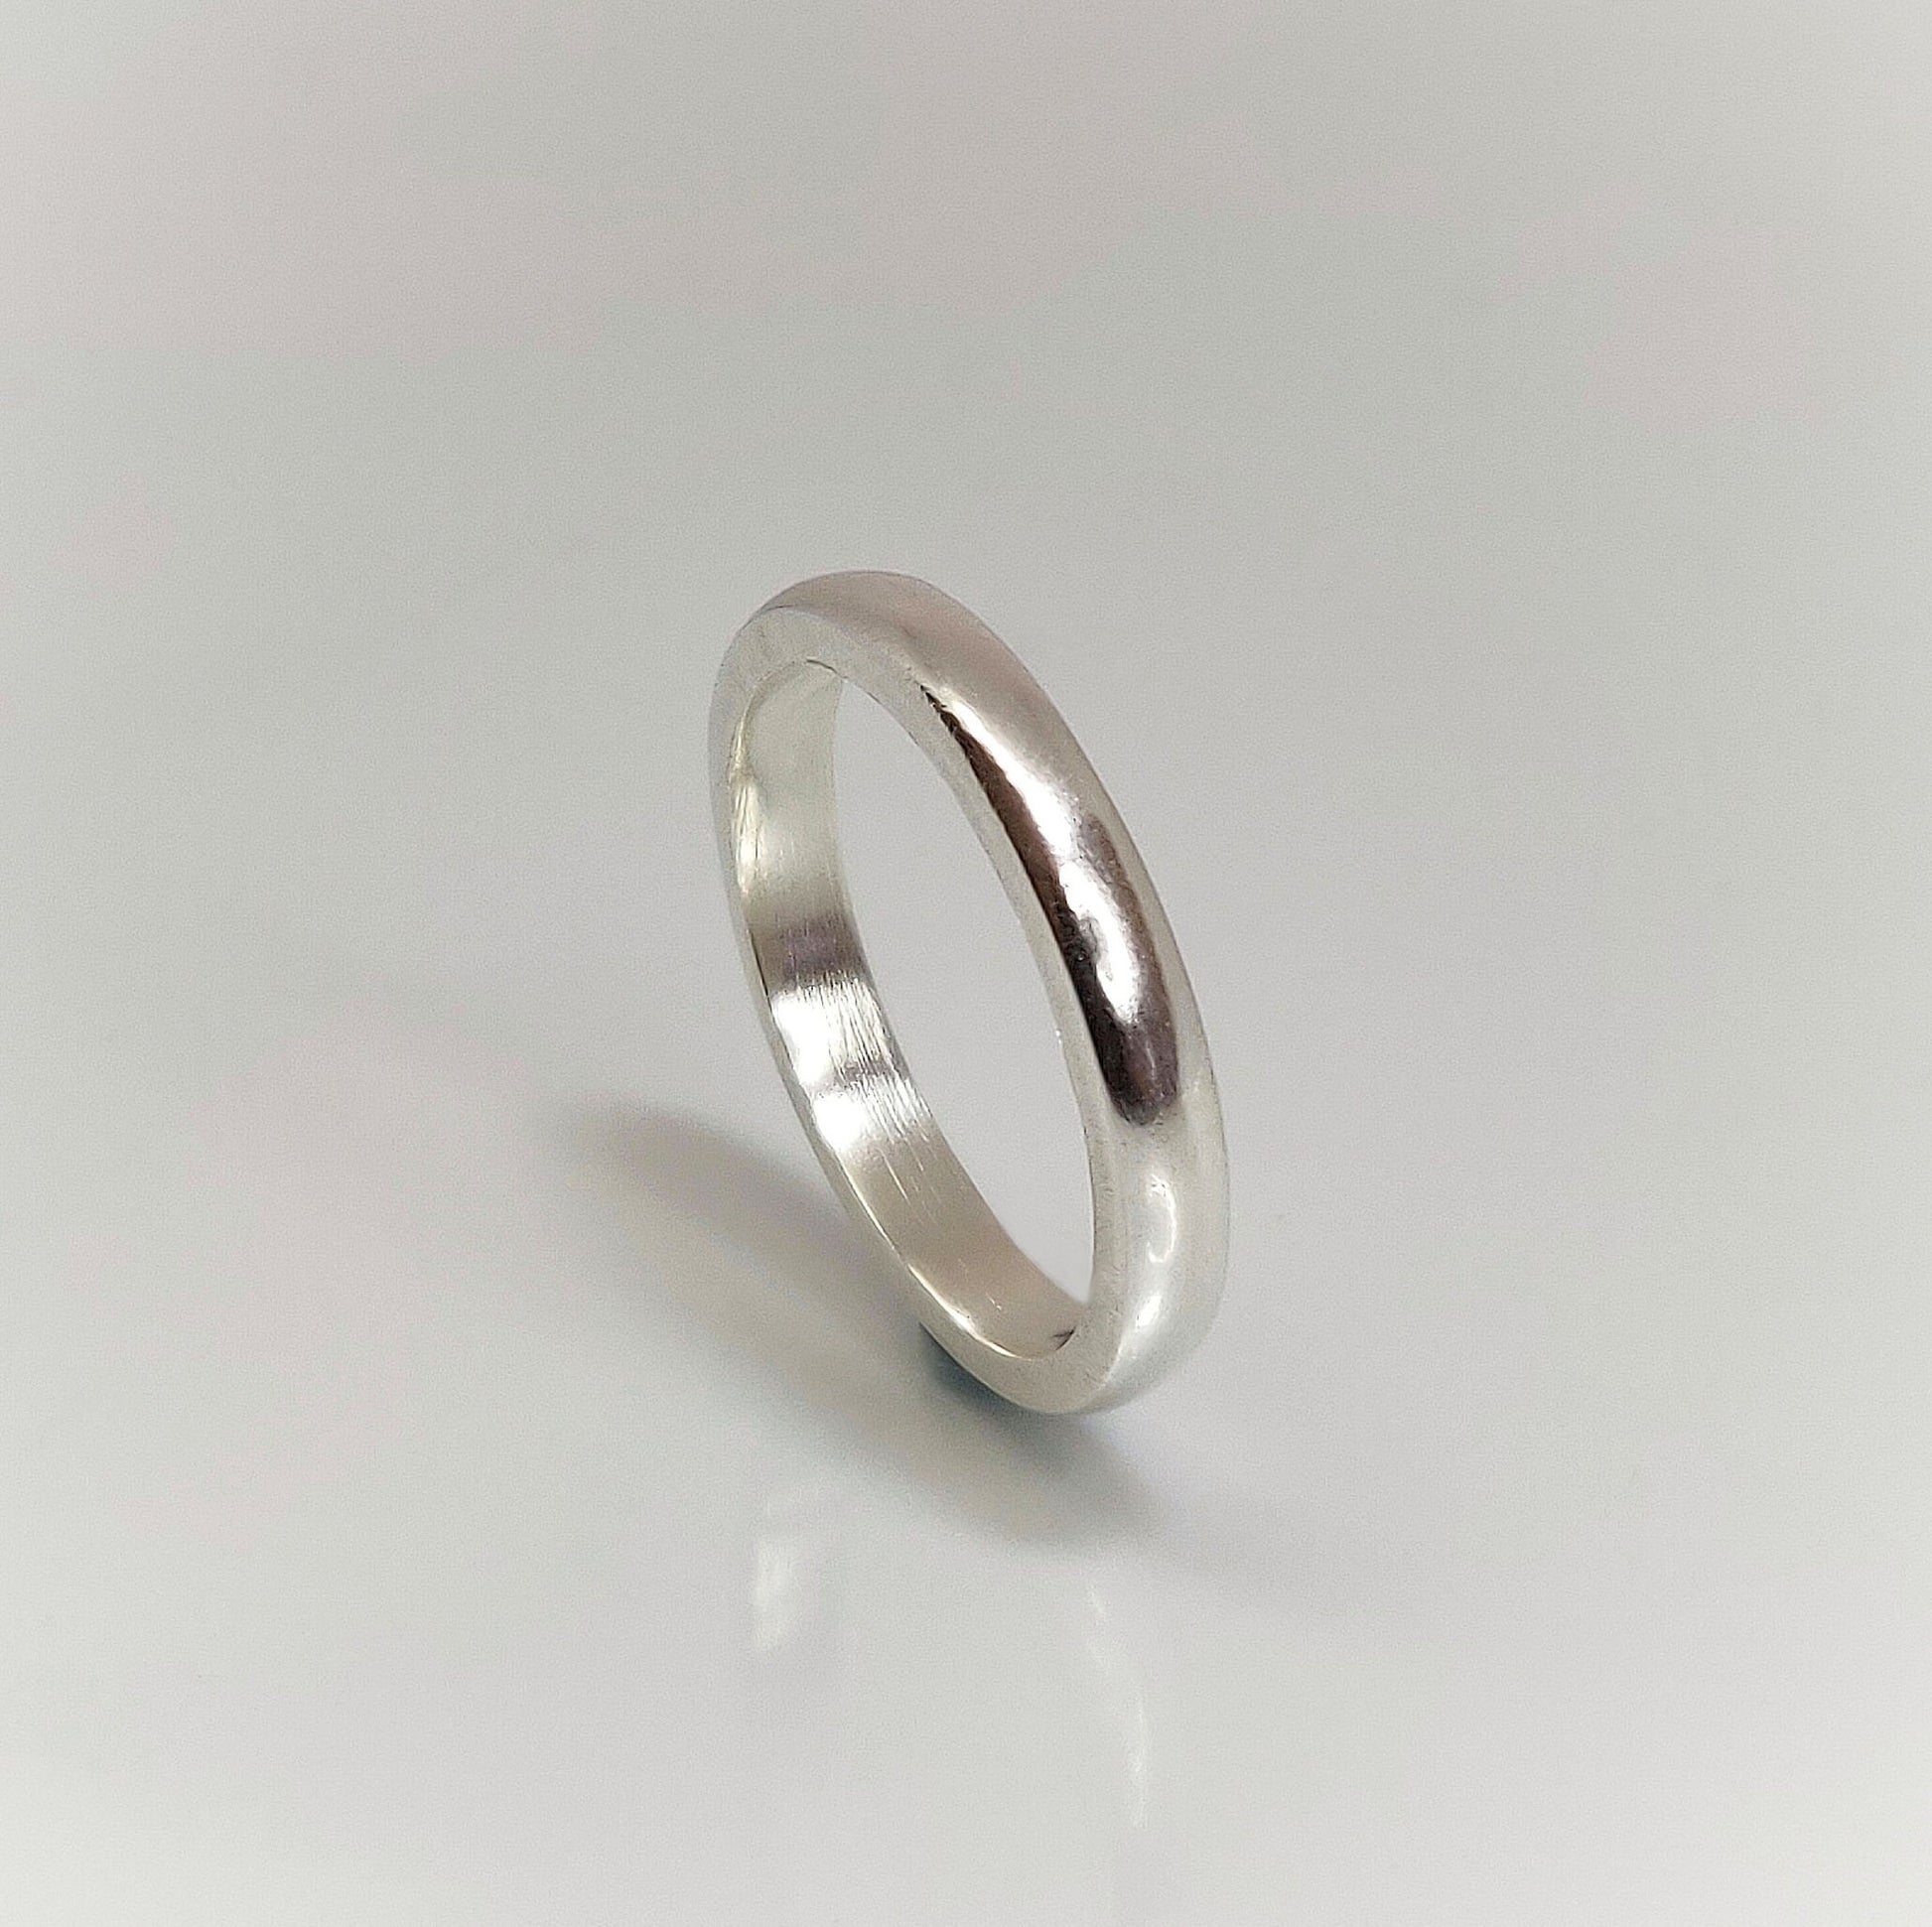 Silver Curved Profile Ring Blank. Cast Wedding Band for Jewelry Making. Jewelry Component. 9ct Yellow Gold Ring Blank.